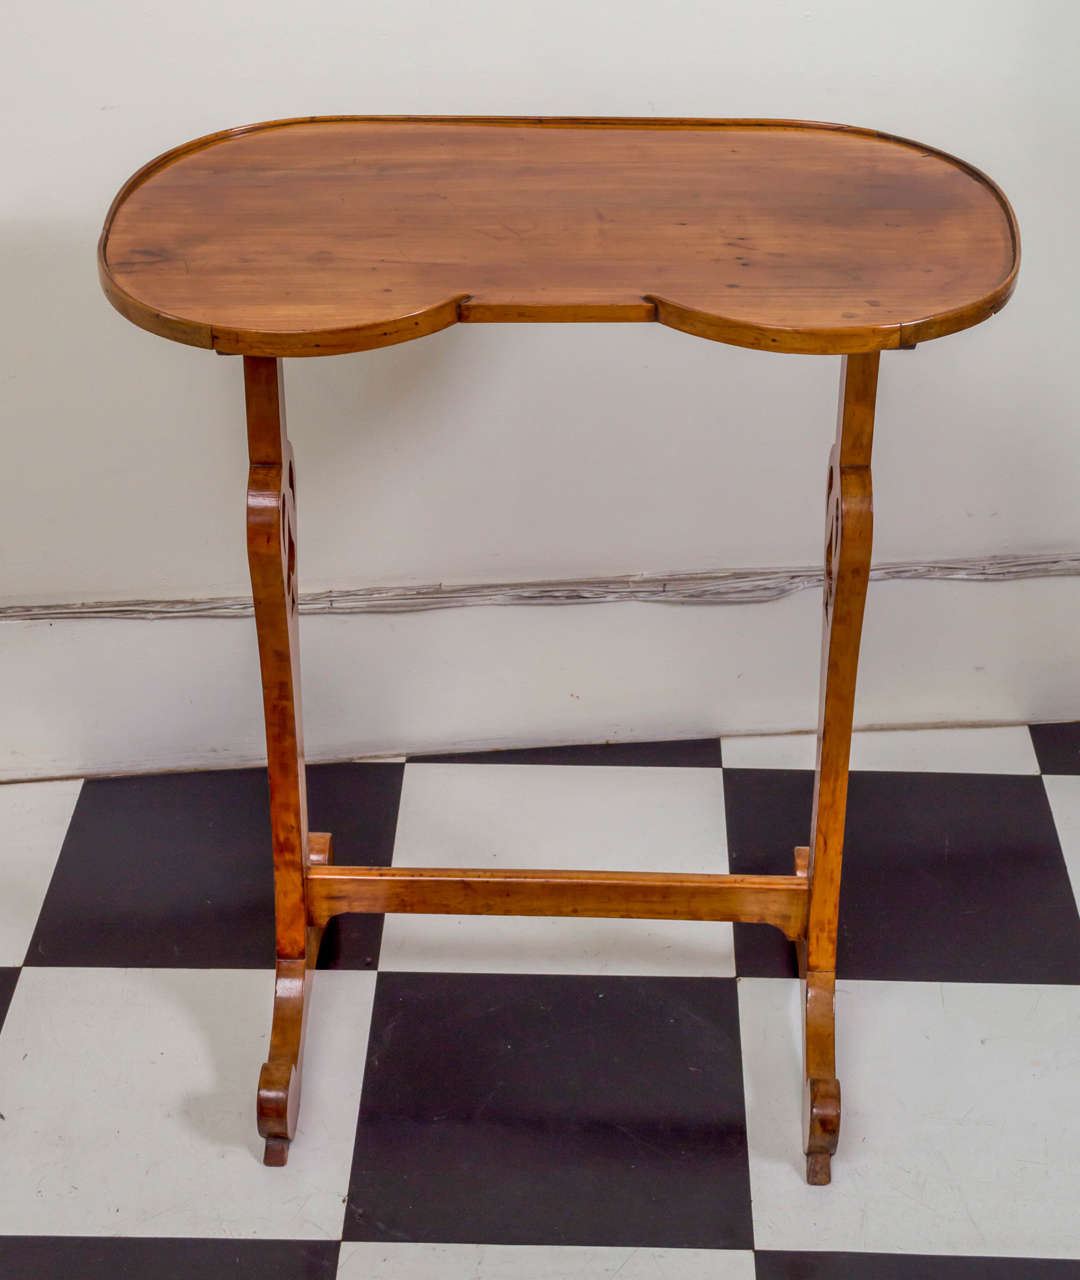 19th century French kidney form cherrywood side table. Interesting spade pierced legs and good color. Broken galleried top. French polished. Stabile footing and balance.